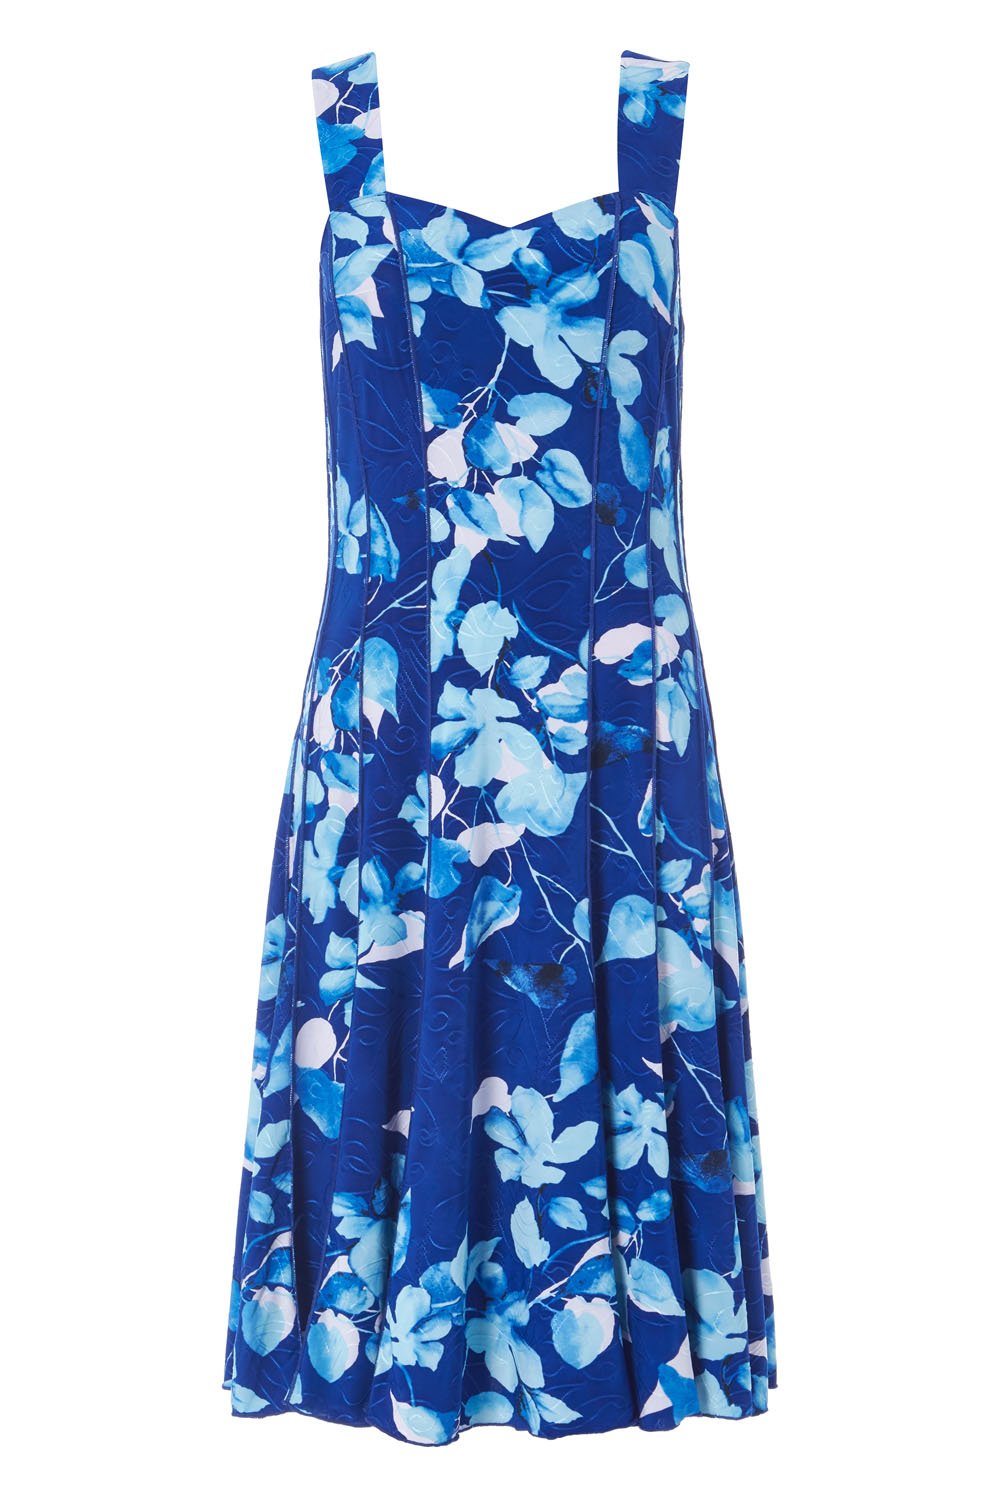 Floral Print Panel Fit and Flare Dress in Royal Blue - Roman Originals UK